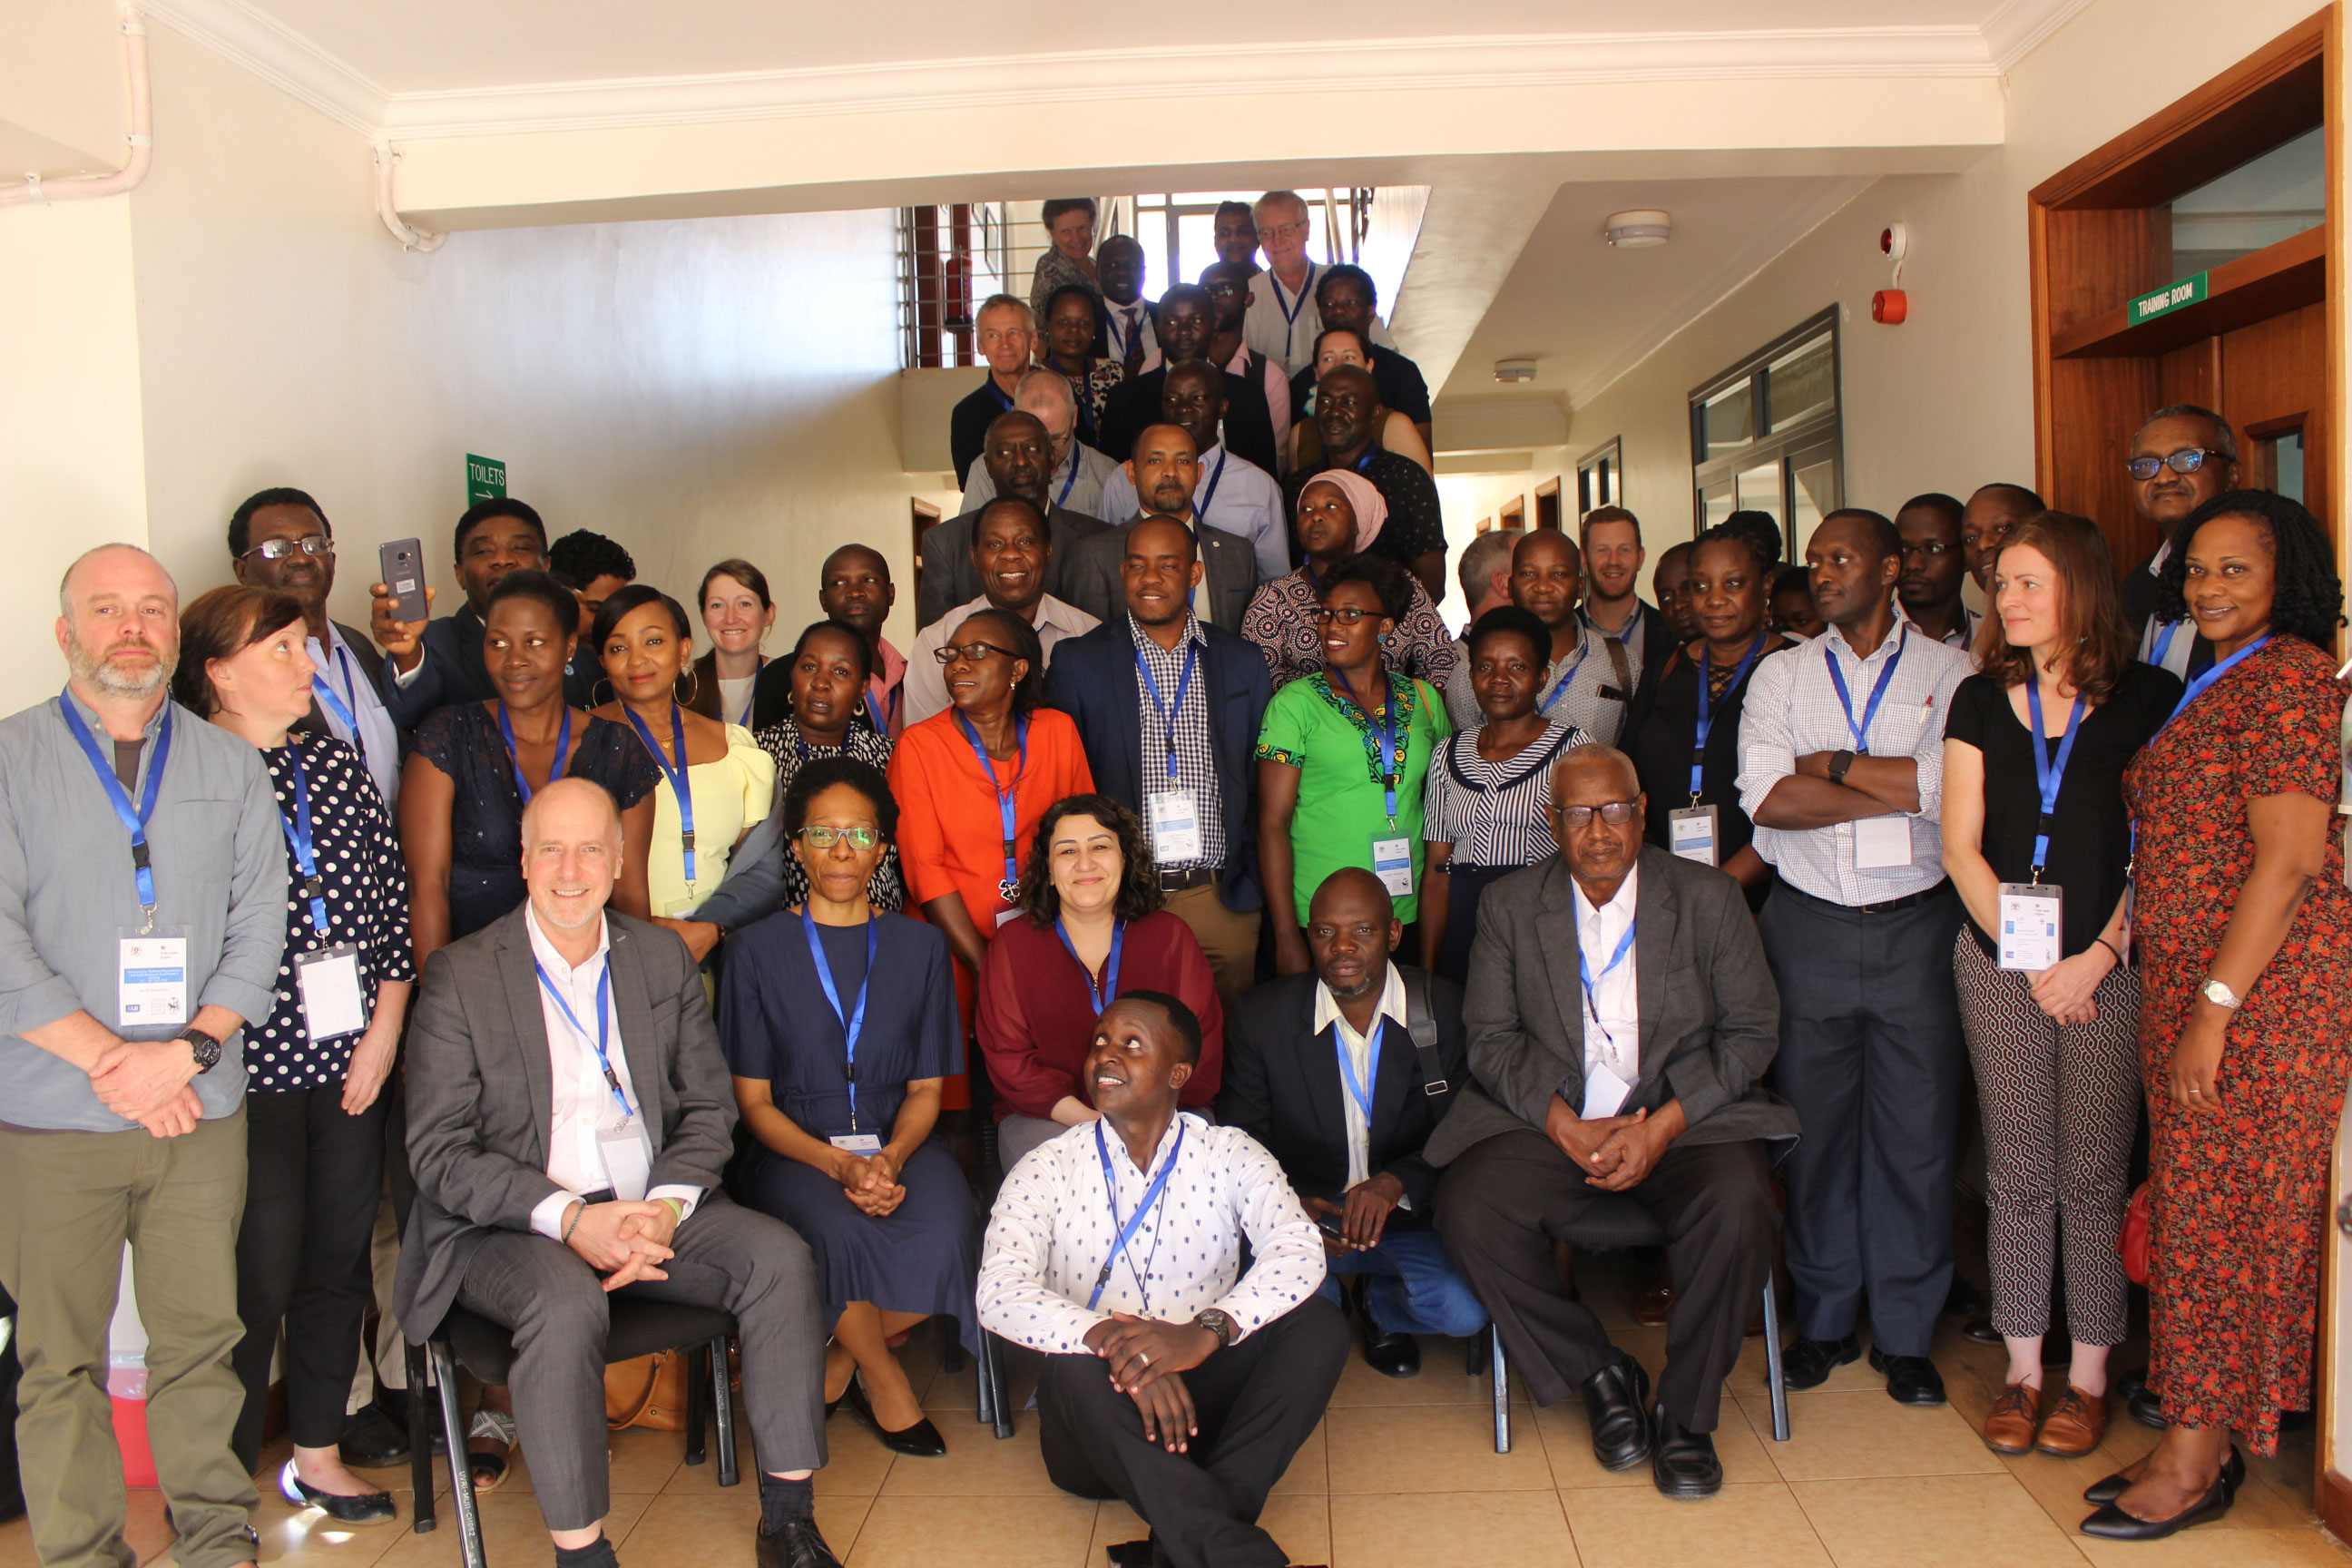 Meeting hosted by Uganda Virus Research Institute and UK-PHRST